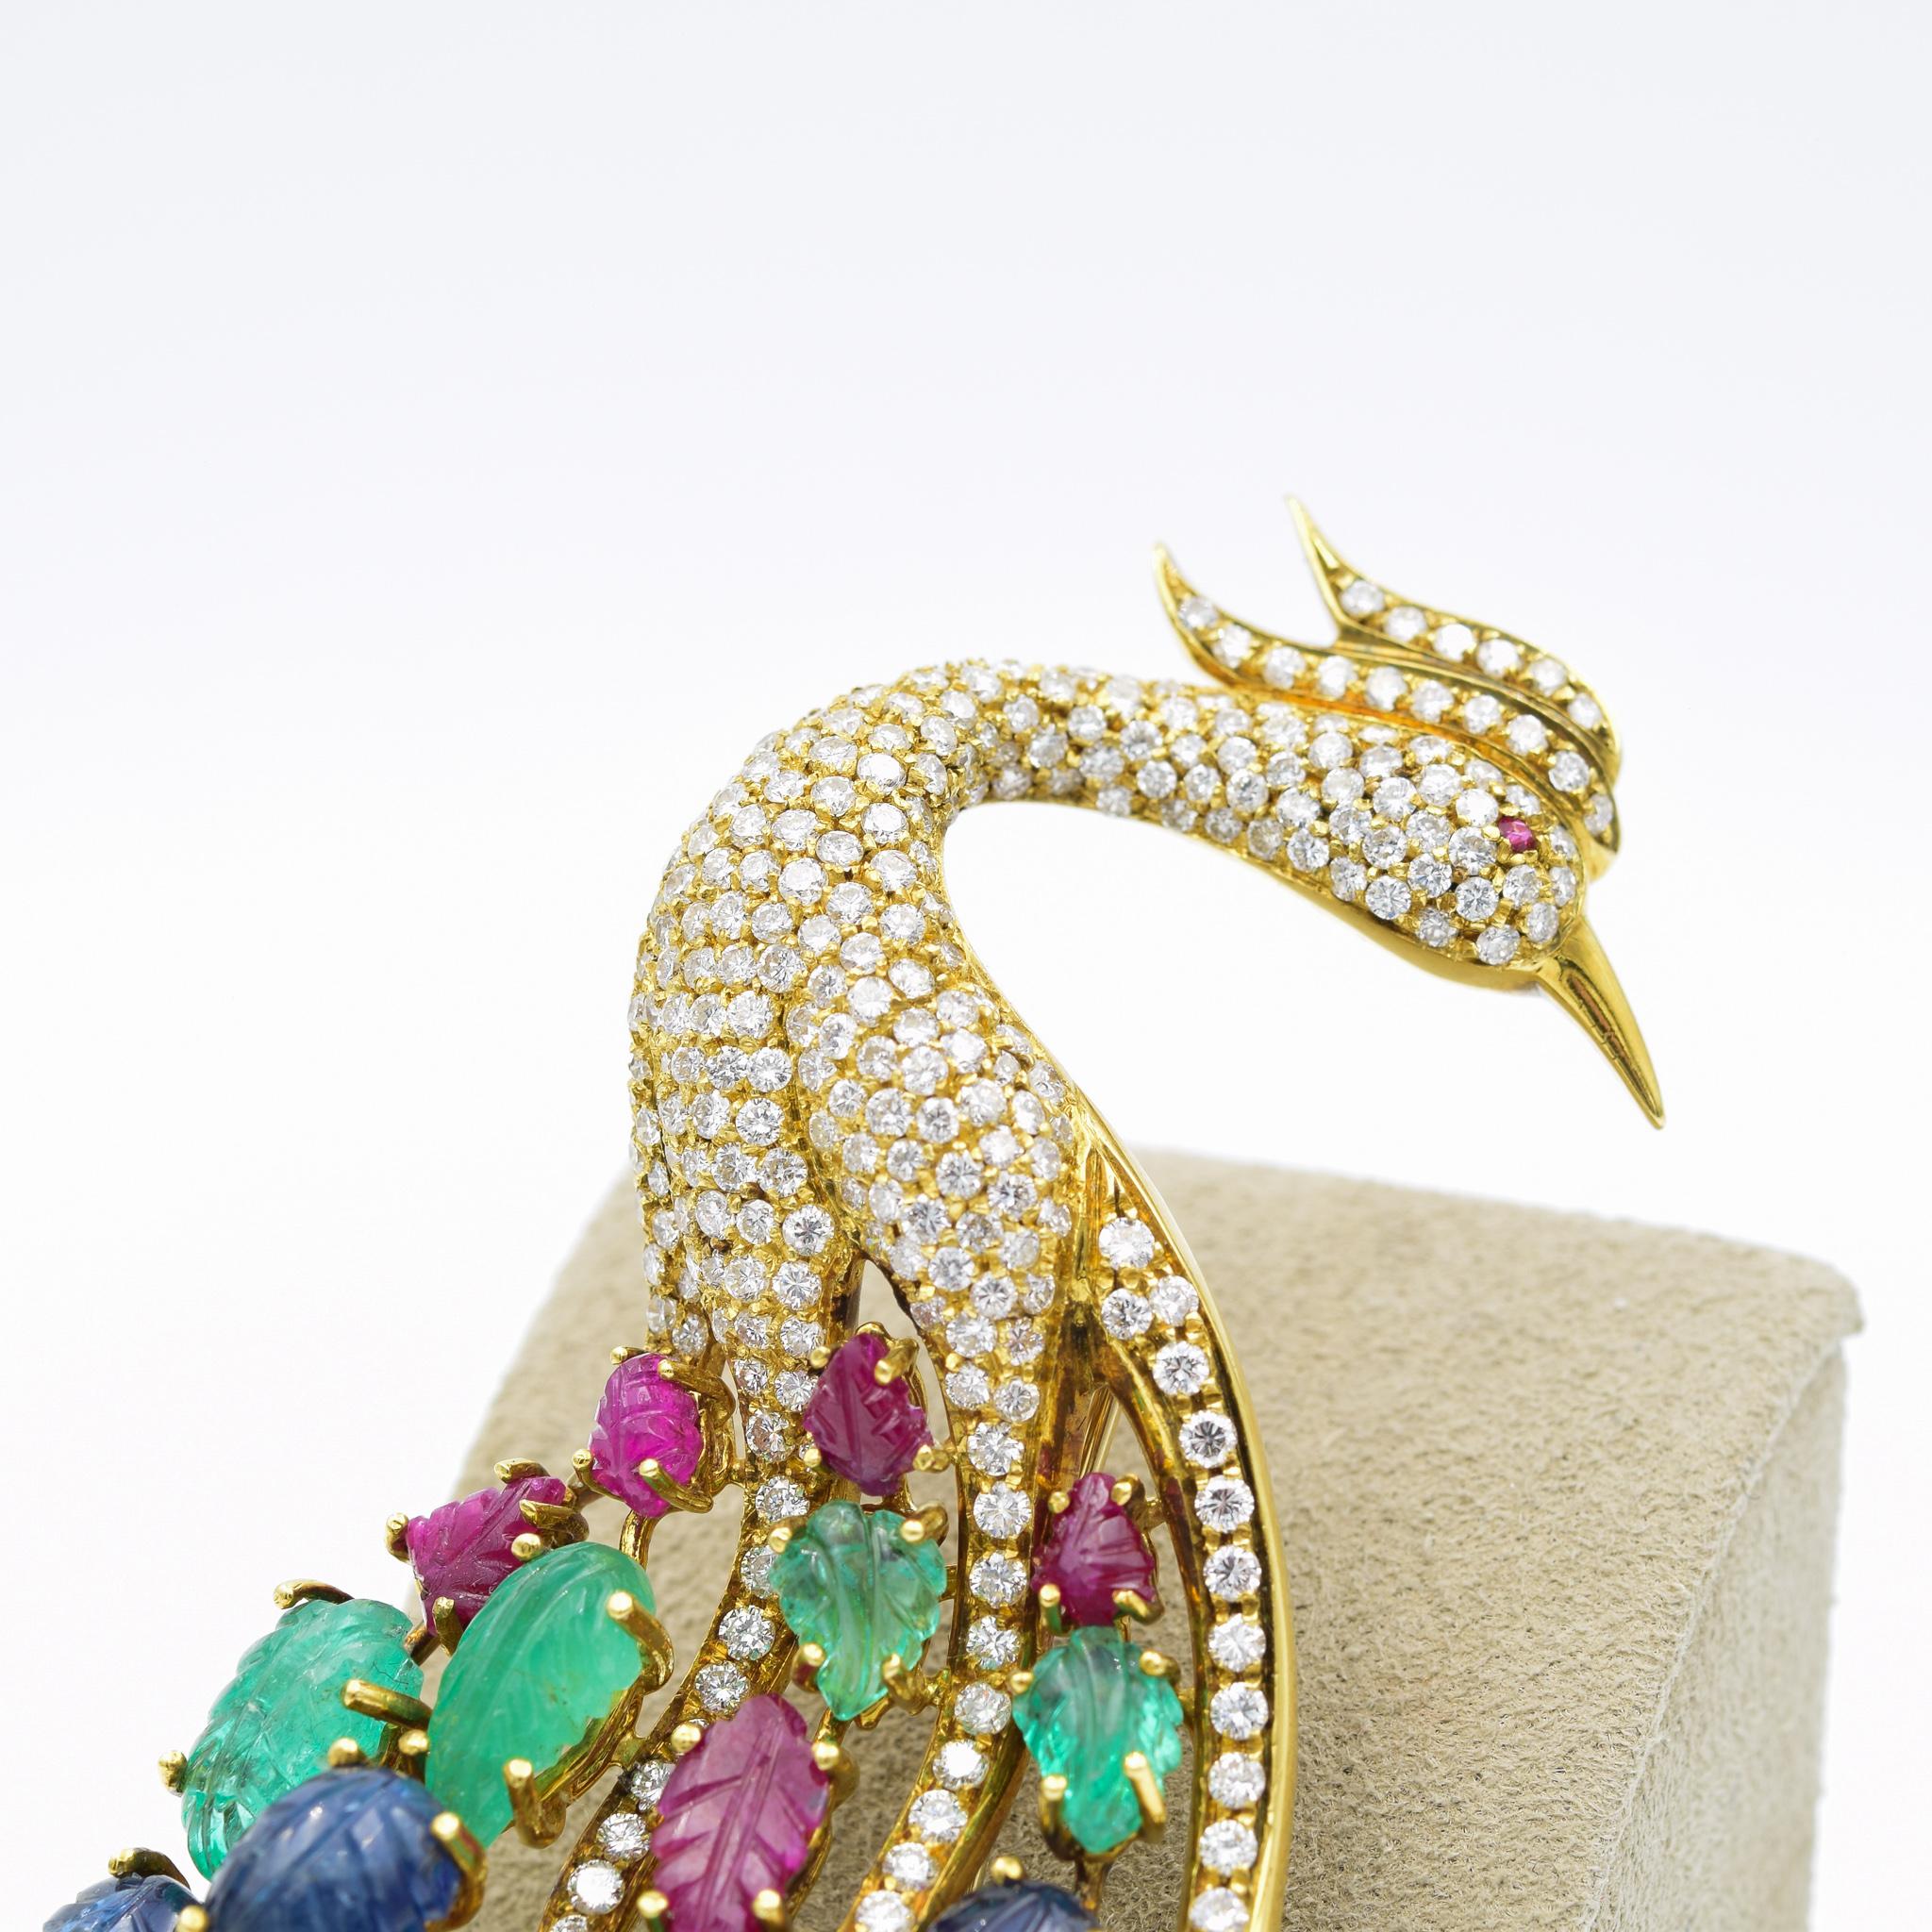 The house of Giovane has forged its name with exquisite jewelry crafted in one of Italy's oldest and most esteemed workshops. This peacock brooch was made in 18 karat gold and is adorned with beautiful diamonds and gemstones. Stamped 3224 AL Giovane